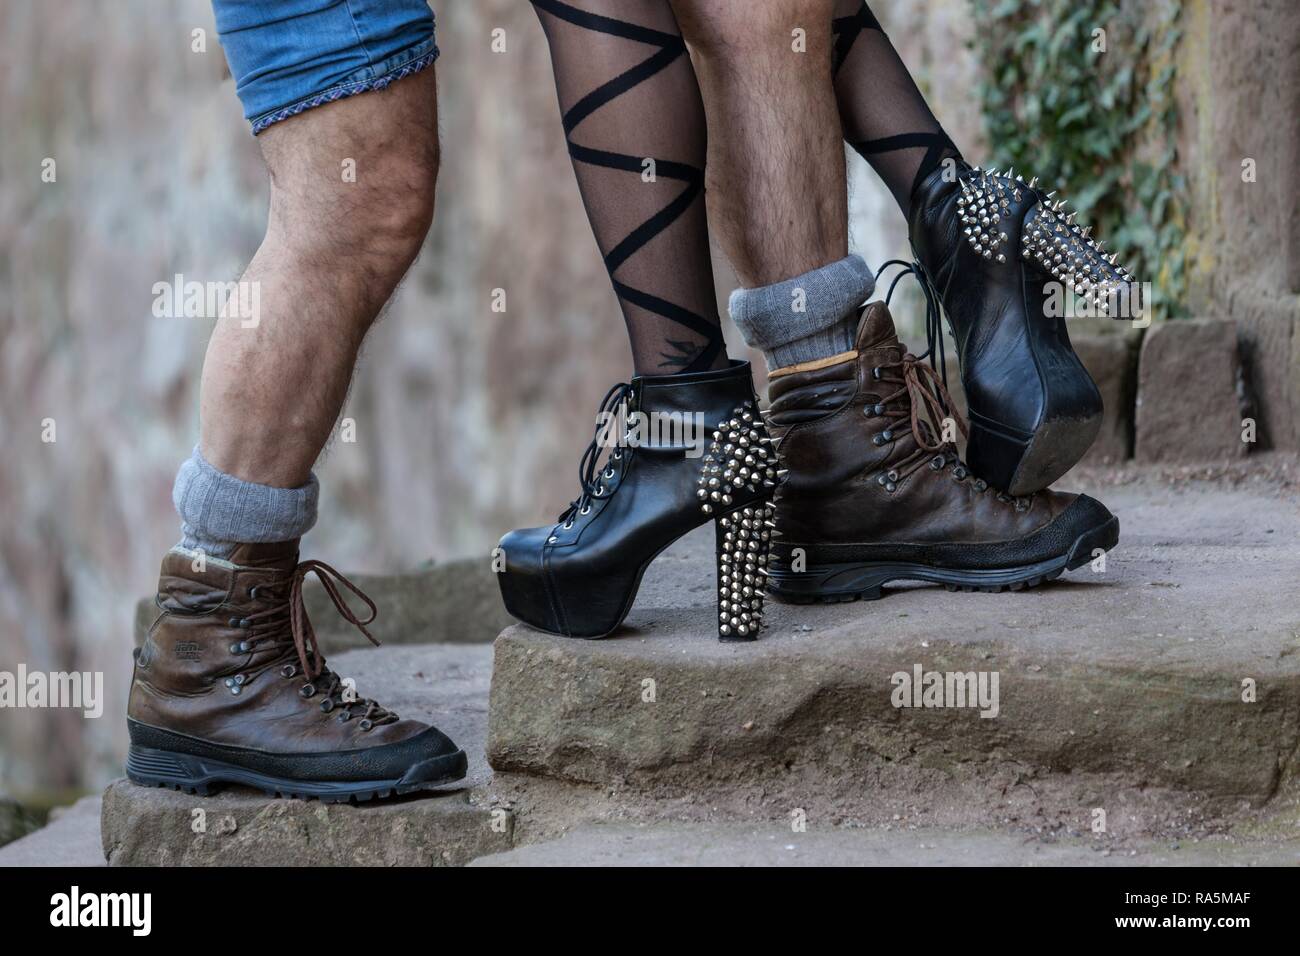 Legs of a man with mountain boots and a woman with high heels, Germany Stock Photo